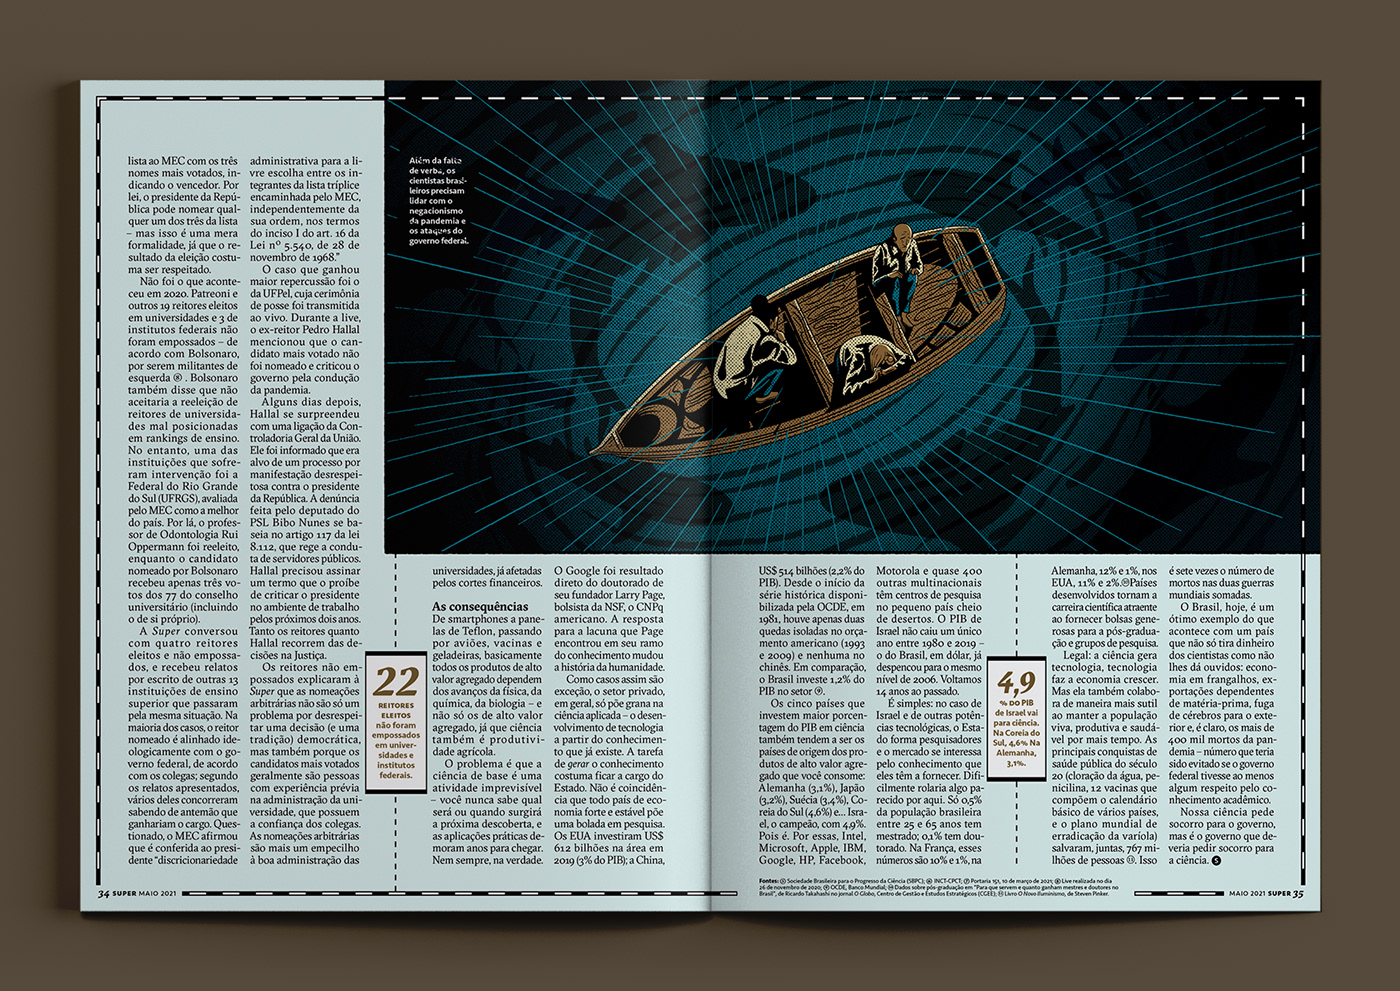 article editorial design  Government ILLUSTRATION  Layout magazine research science spread story